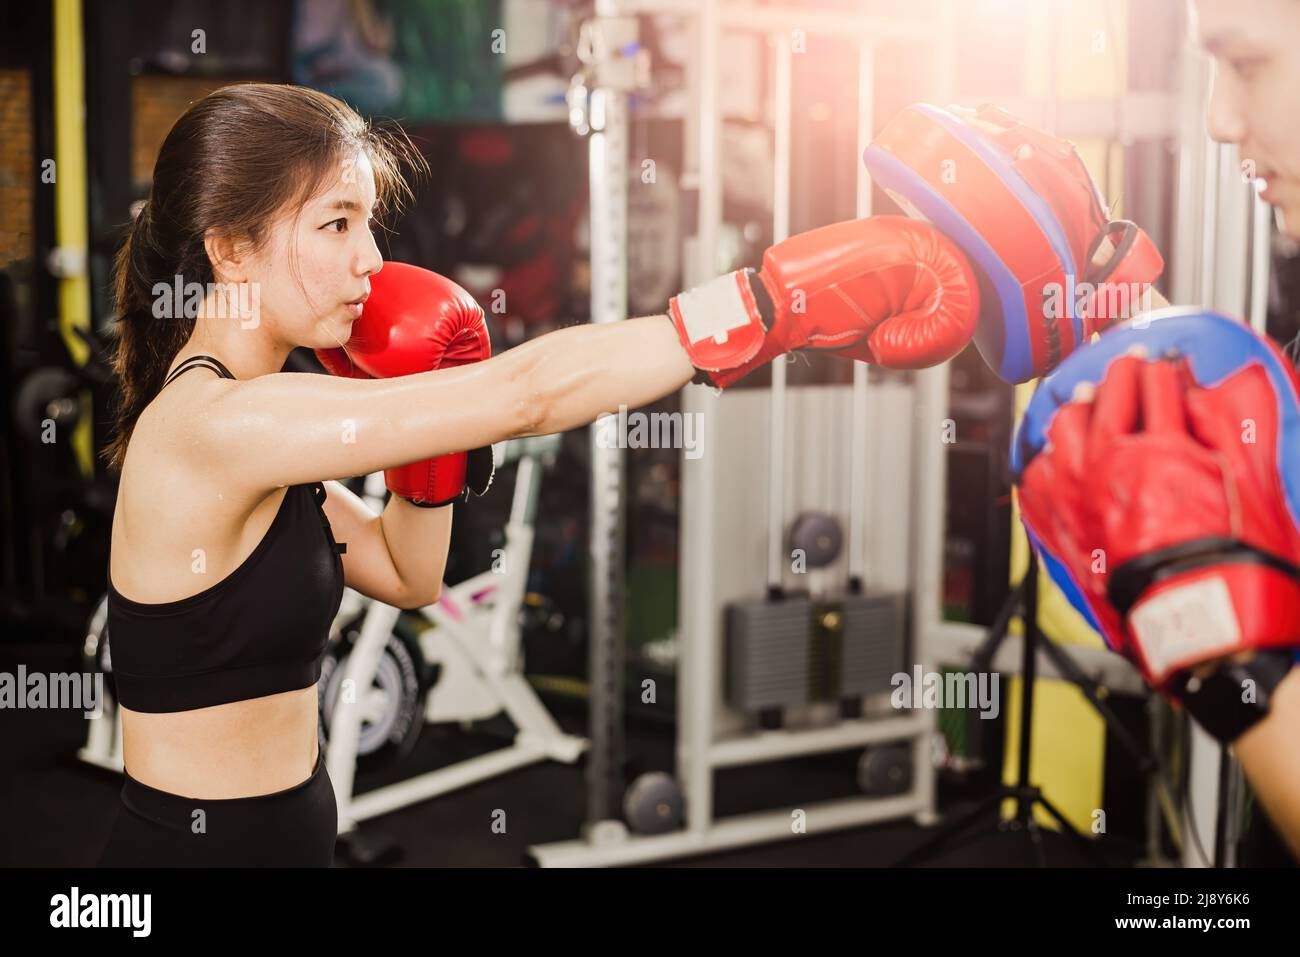 Asian female boxer training Punch the trainer's aim. Stock Photo